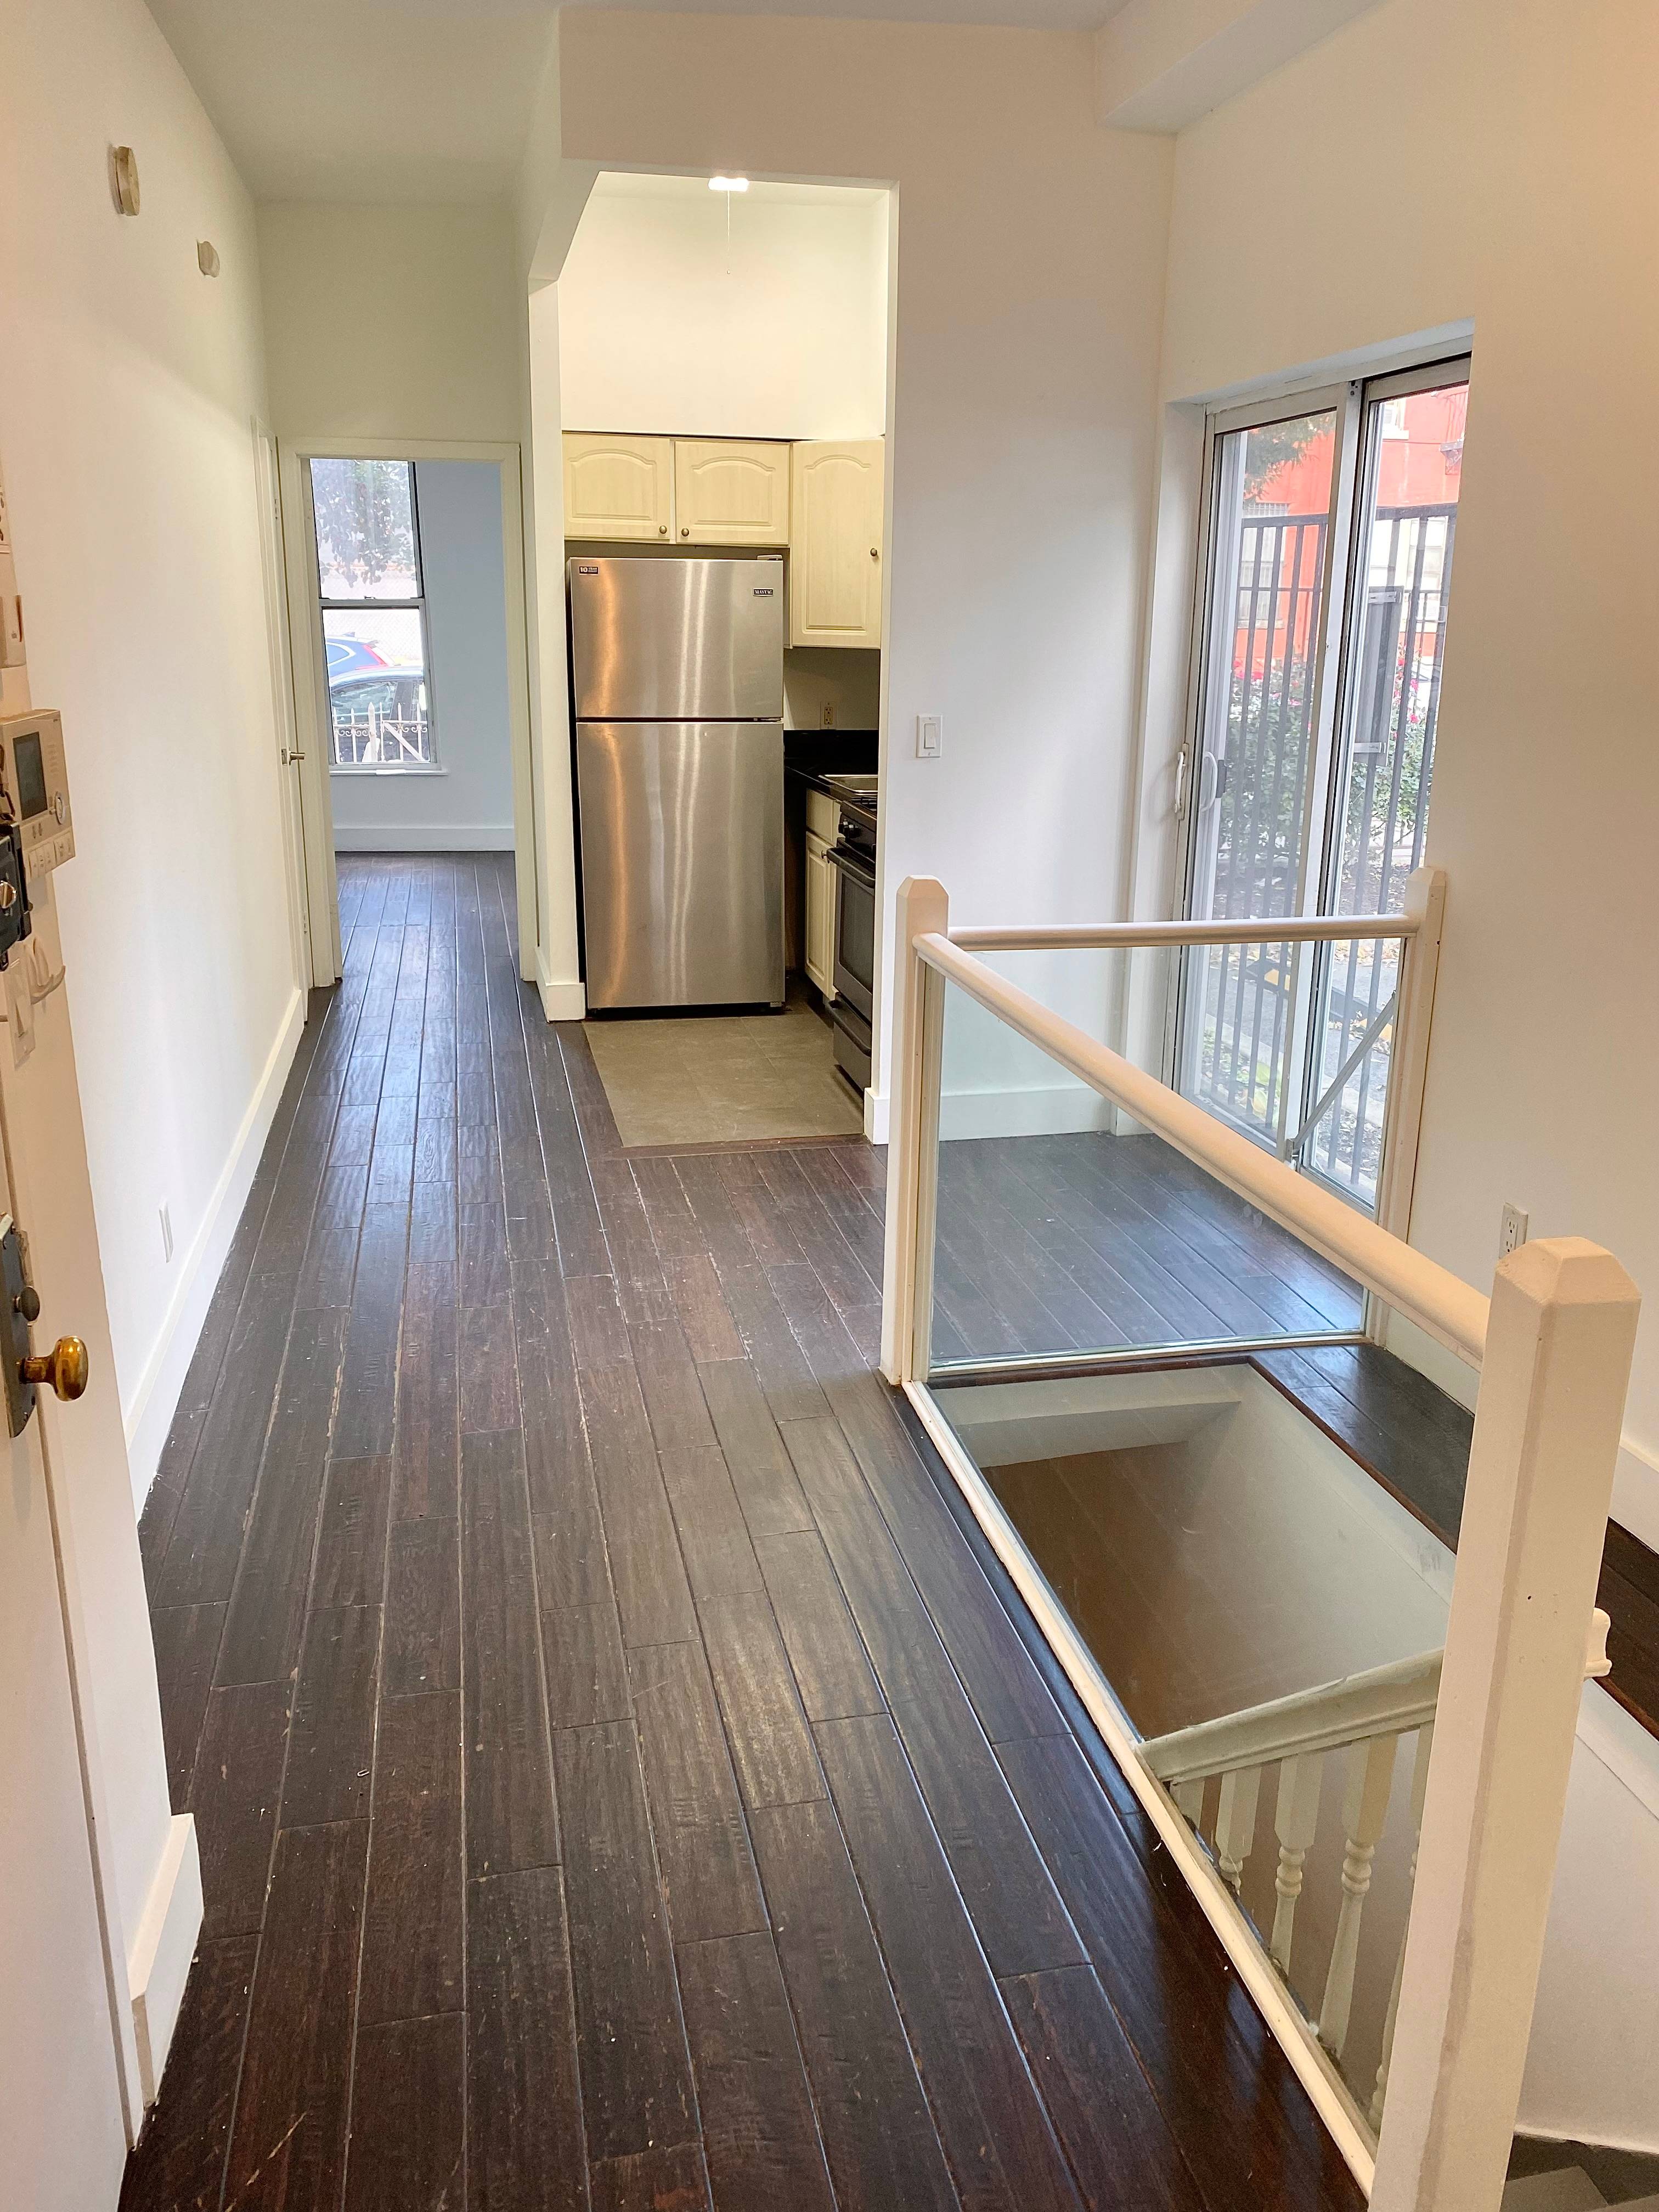 TWO BEDROOM DUPLEX IN THE HEART OF LIC!